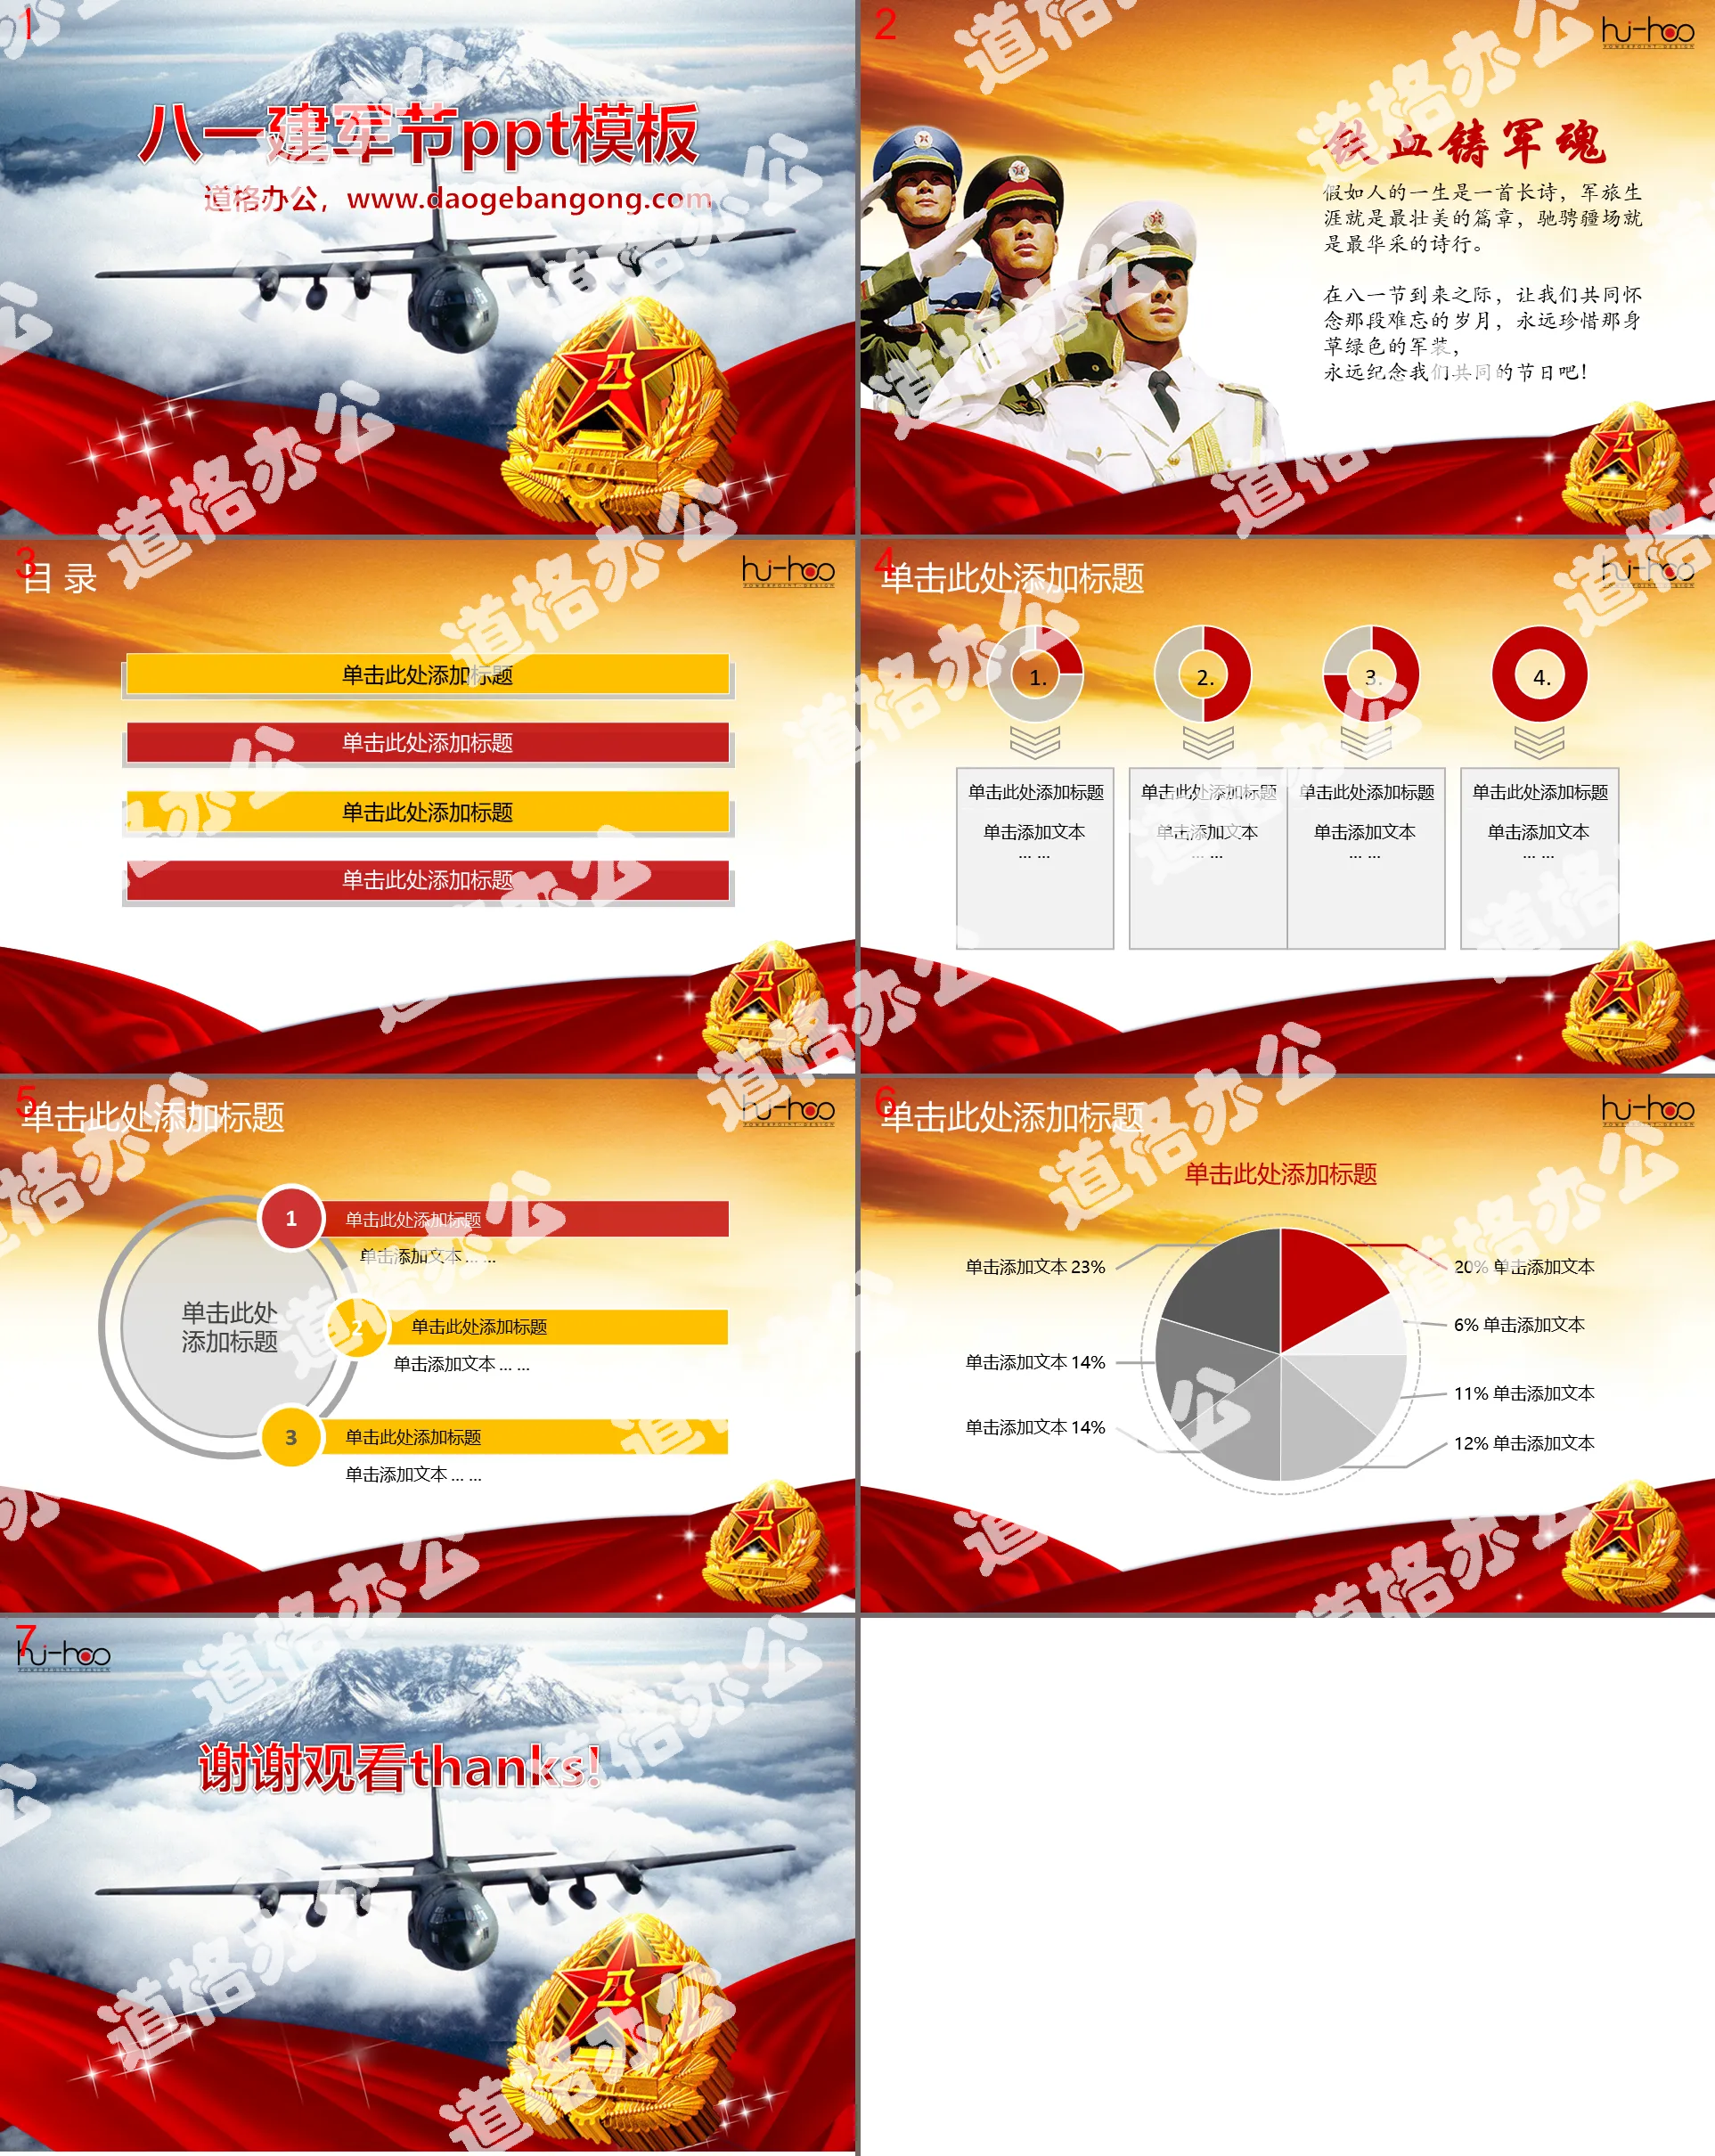 Ribbon aircraft military emblem white cloud background military PPT template